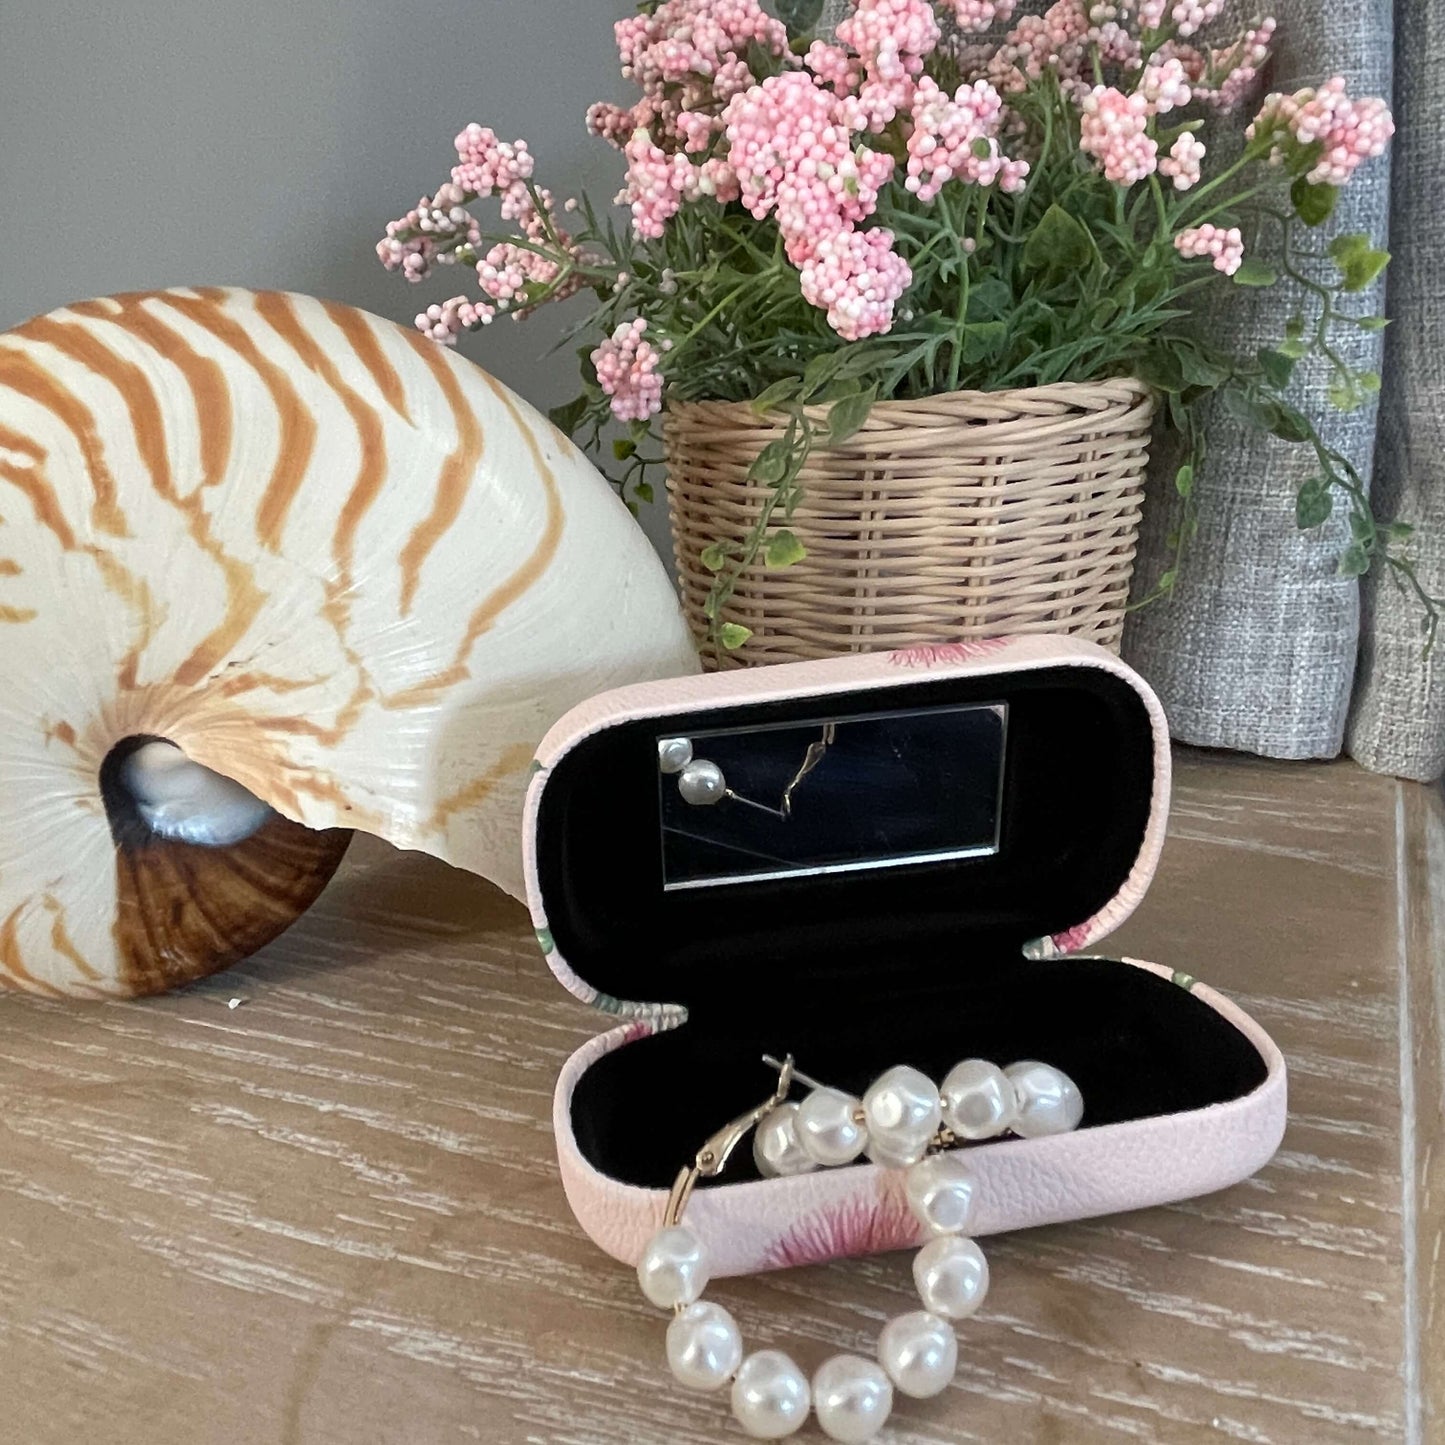 Small trinket case opened showing the mirror and with pearl earrings in it sitting on a table with a large shell and faux pot plant.